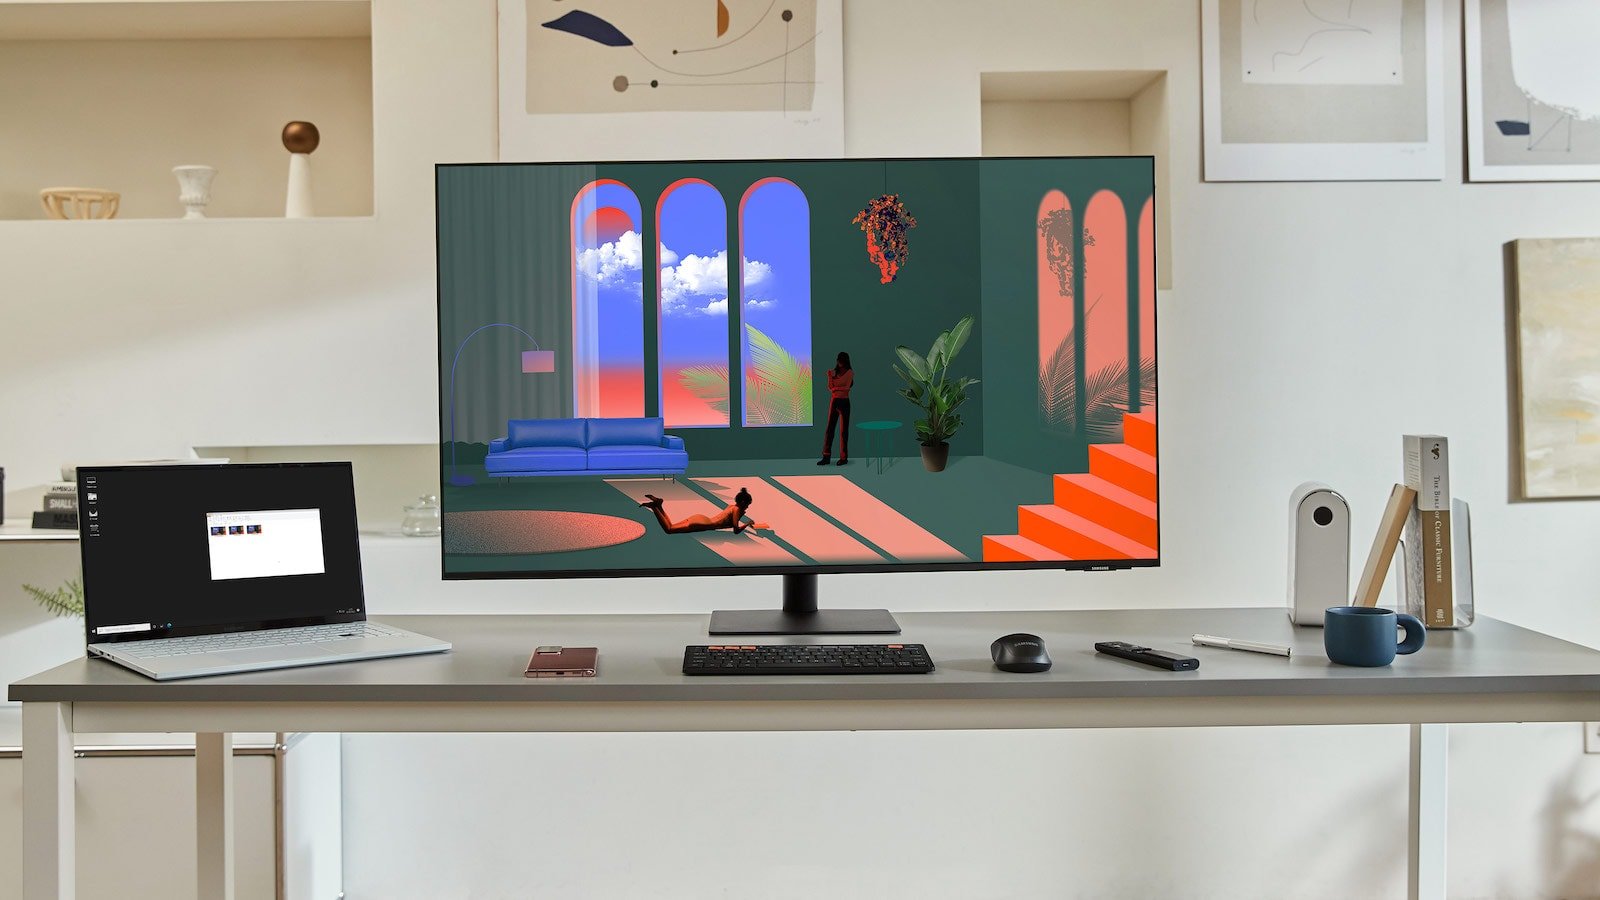 Samsung M7 Smart Monitor now includes a large 43-inch UHD model with a borderless design